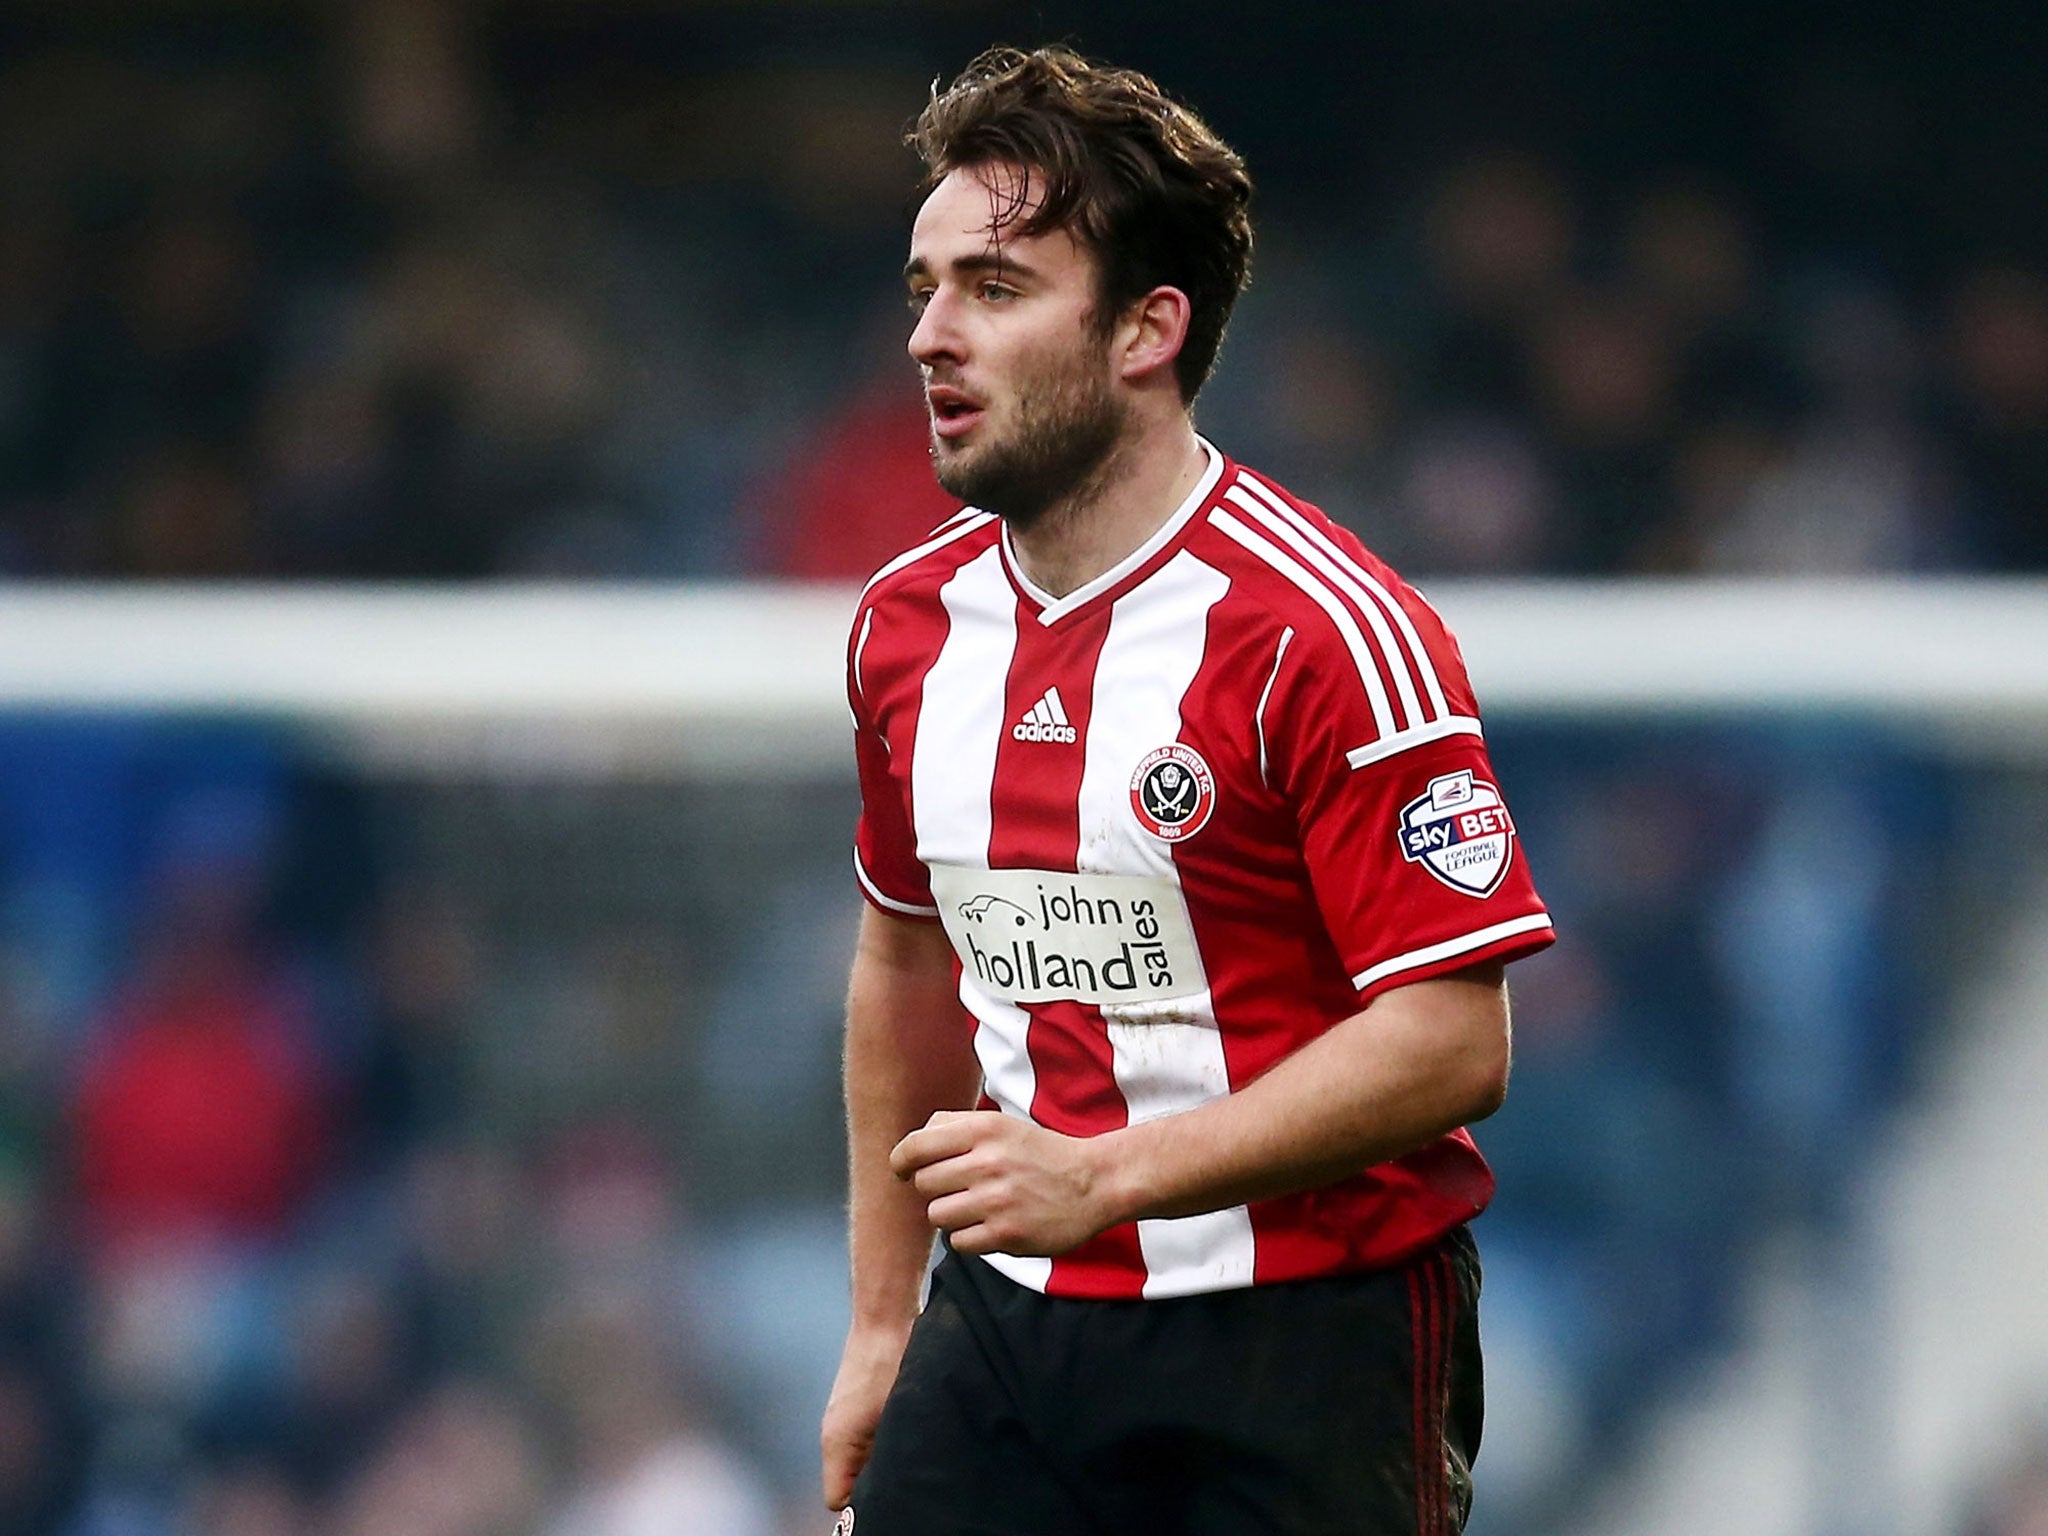 Jose Baxter has been suspended by Sheffield United